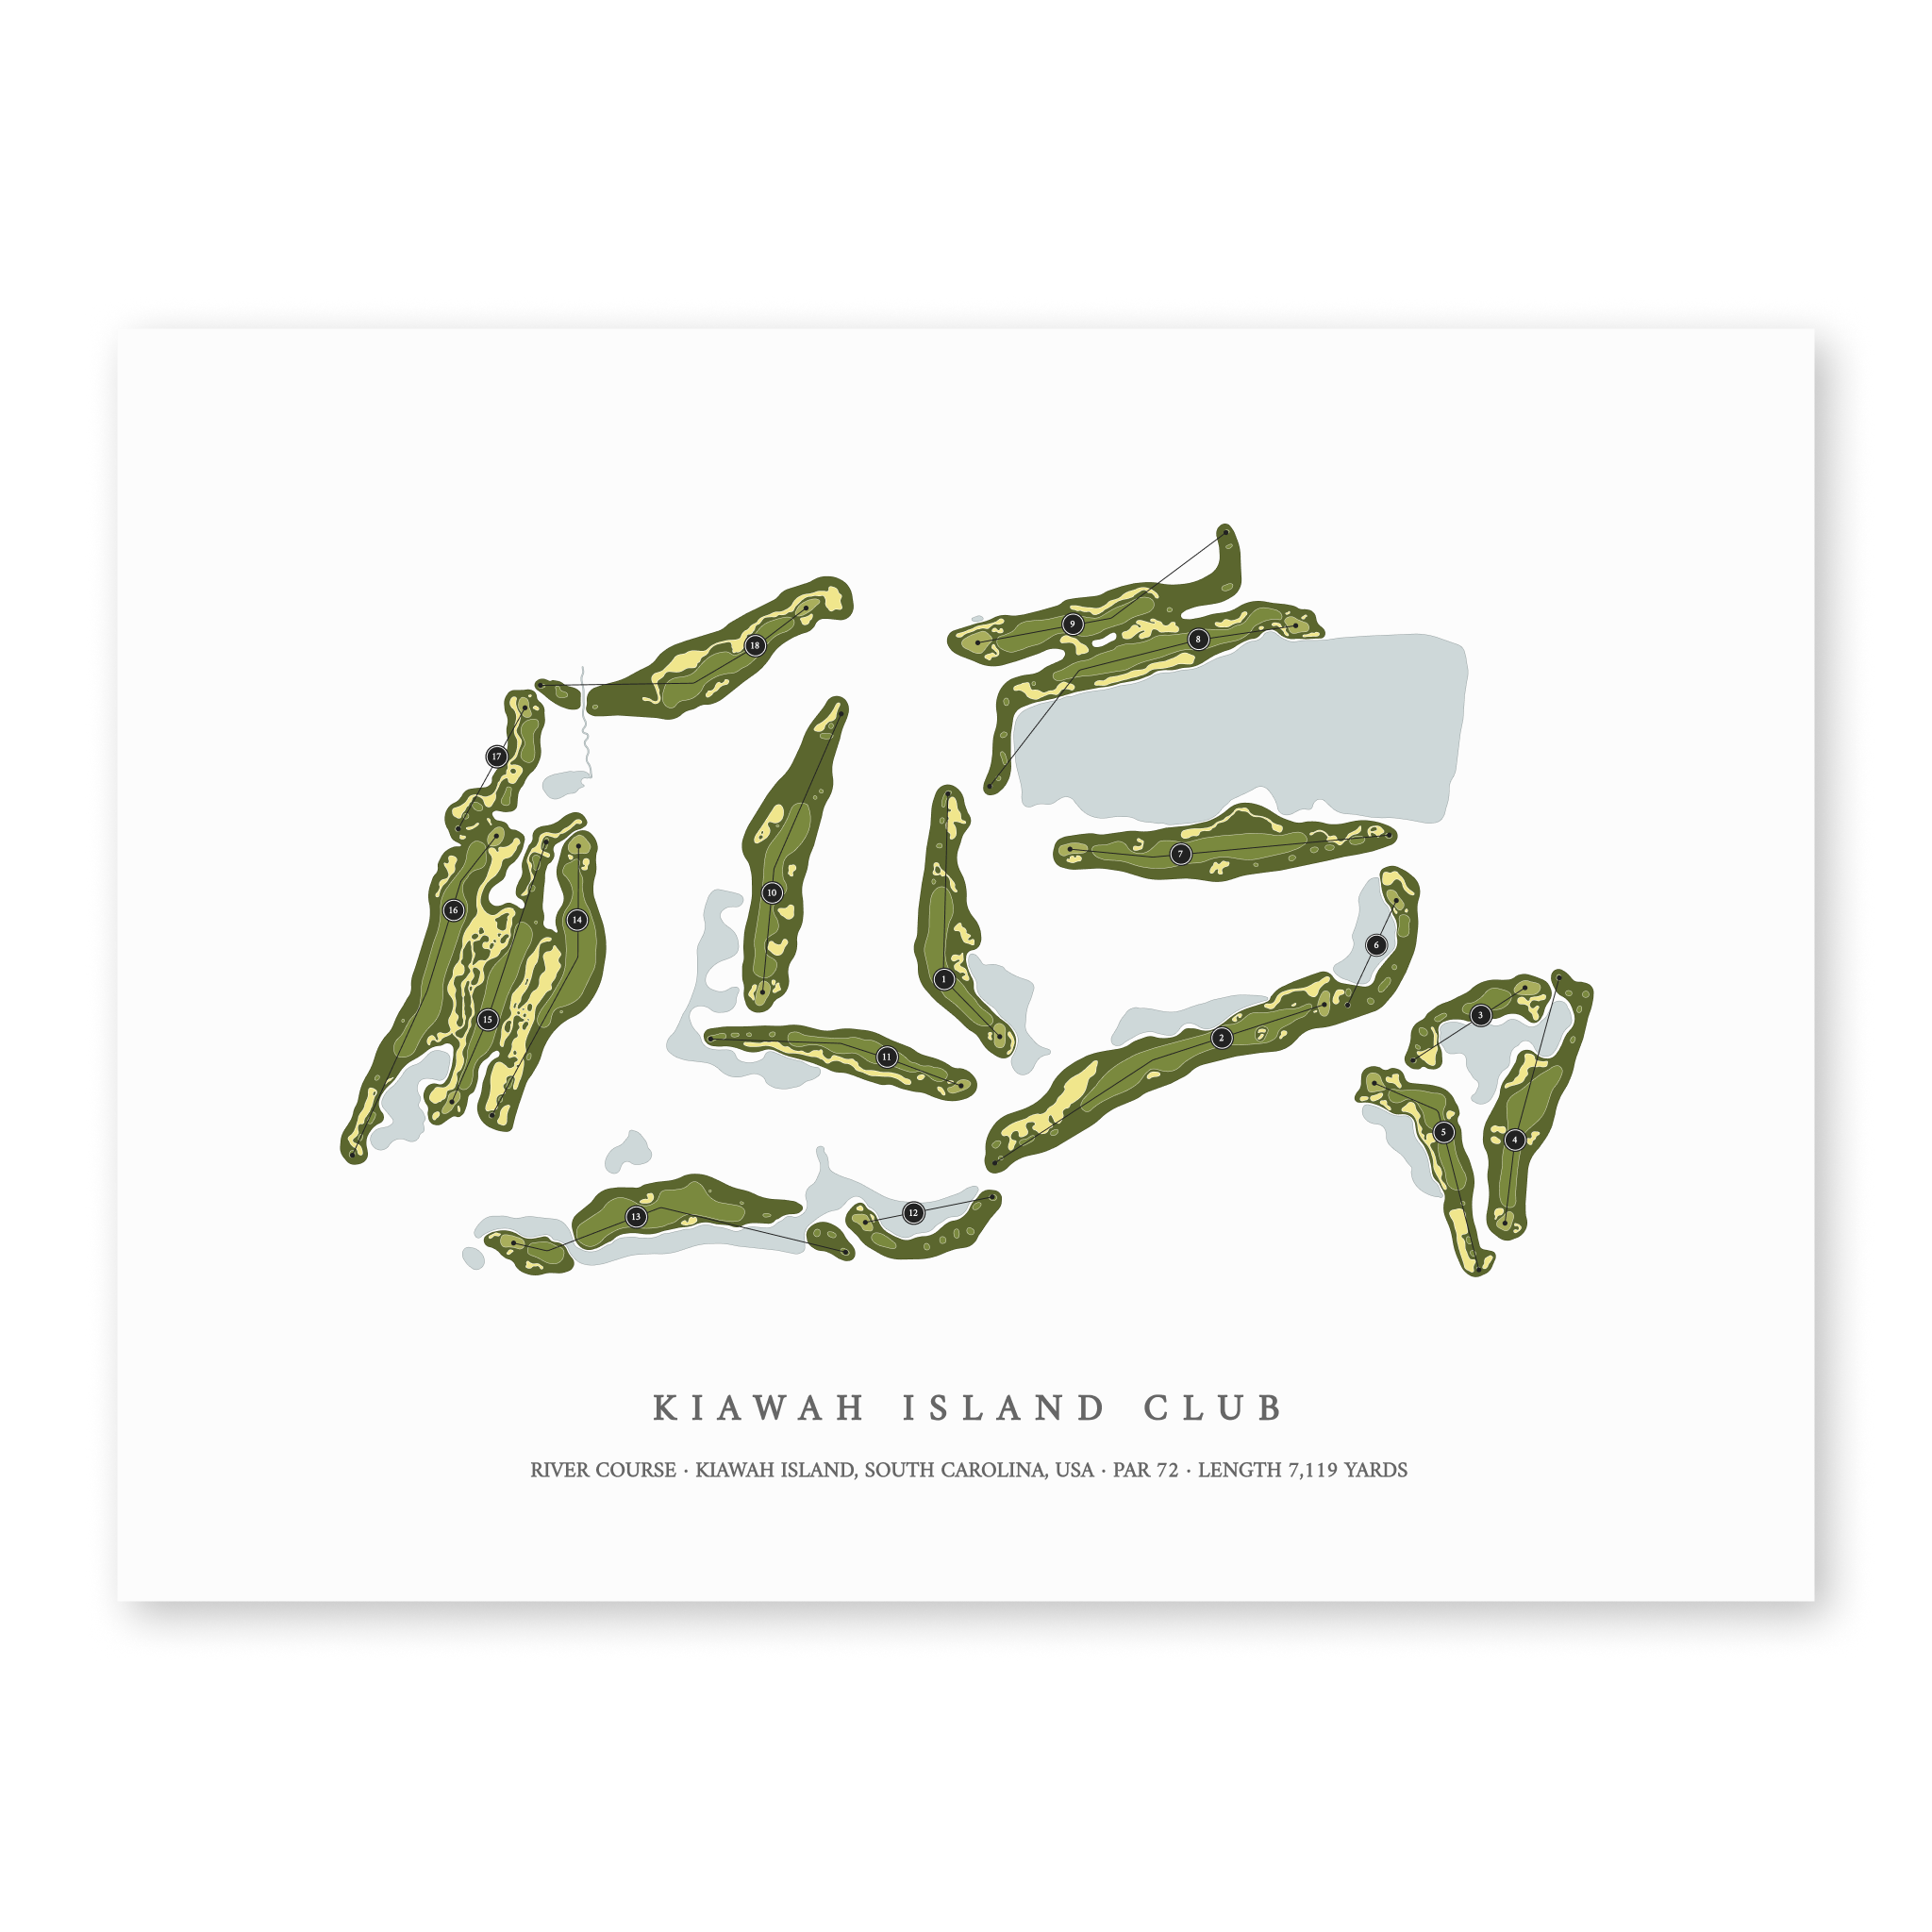 Kiawah Island Club - River Course | Golf Course Map | Unframed With Hole Numbers #hole numbers_yes